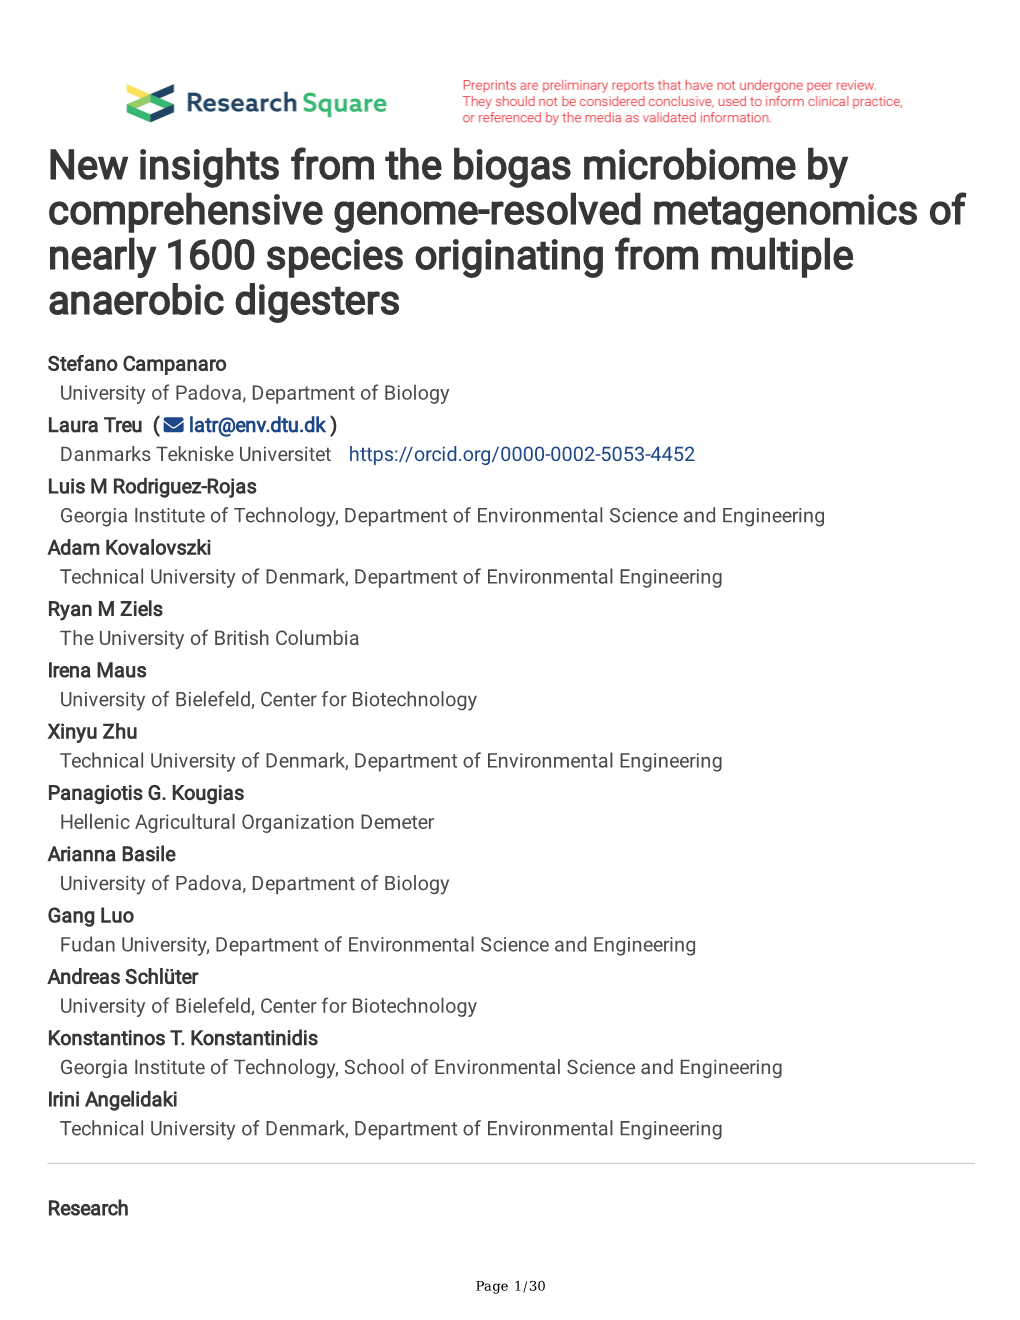 New Insights from the Biogas Microbiome by Comprehensive Genome-Resolved Metagenomics of Nearly 1600 Species Originating from Multiple Anaerobic Digesters